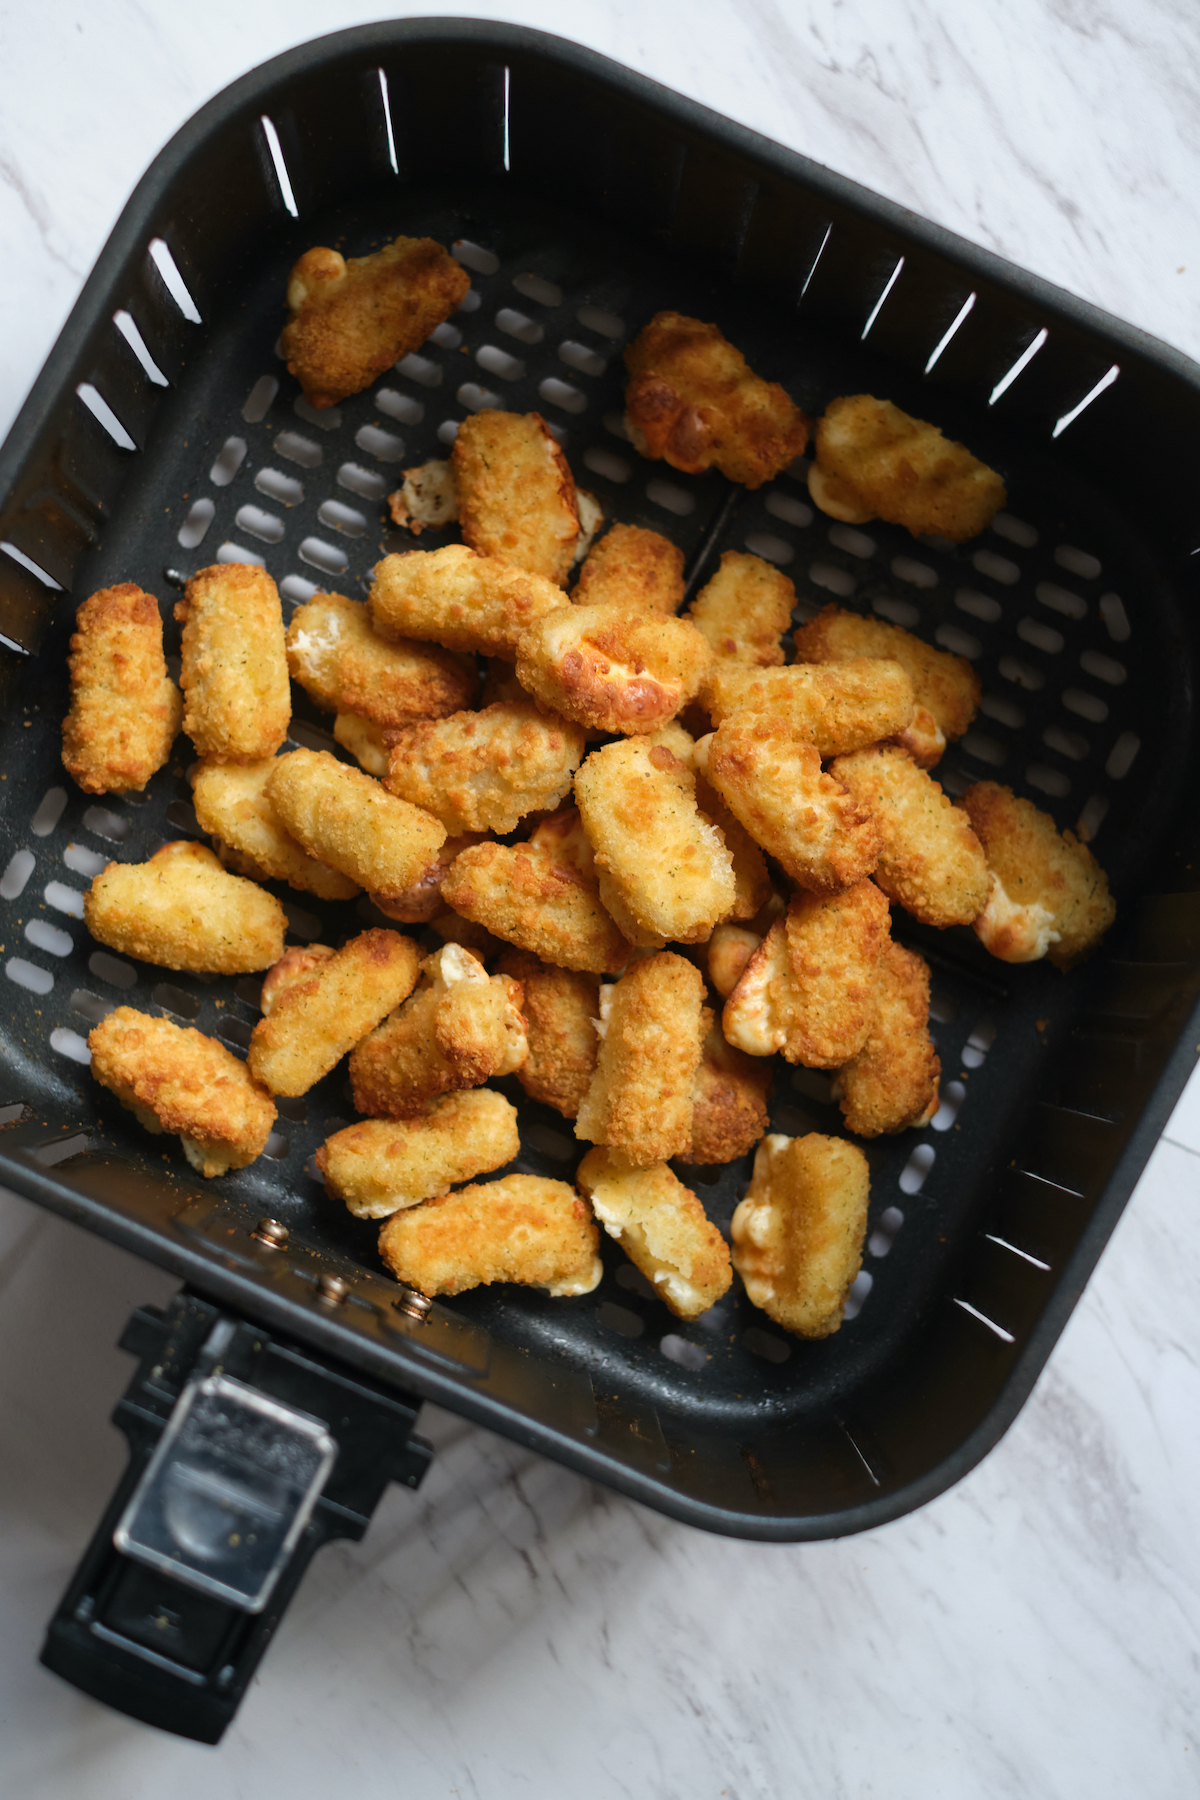 top down view of the cooked mozzarella sticks inside the air fryer basket